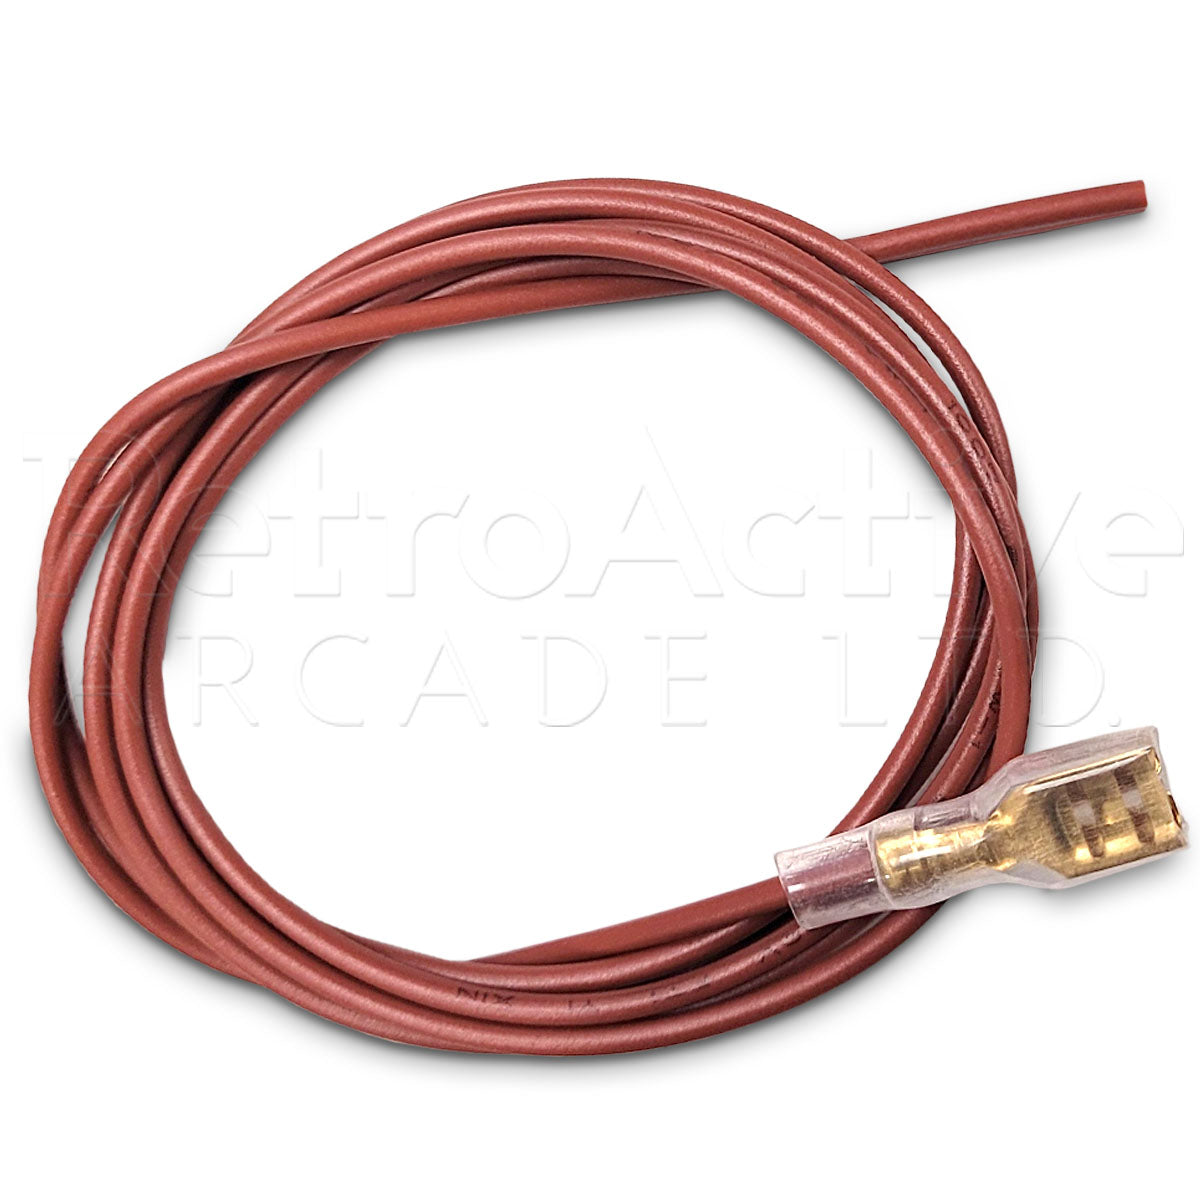 1 Meter Wire with .110" Connector - Brown Wiring & Harnesses Universal - Retro Active Arcade